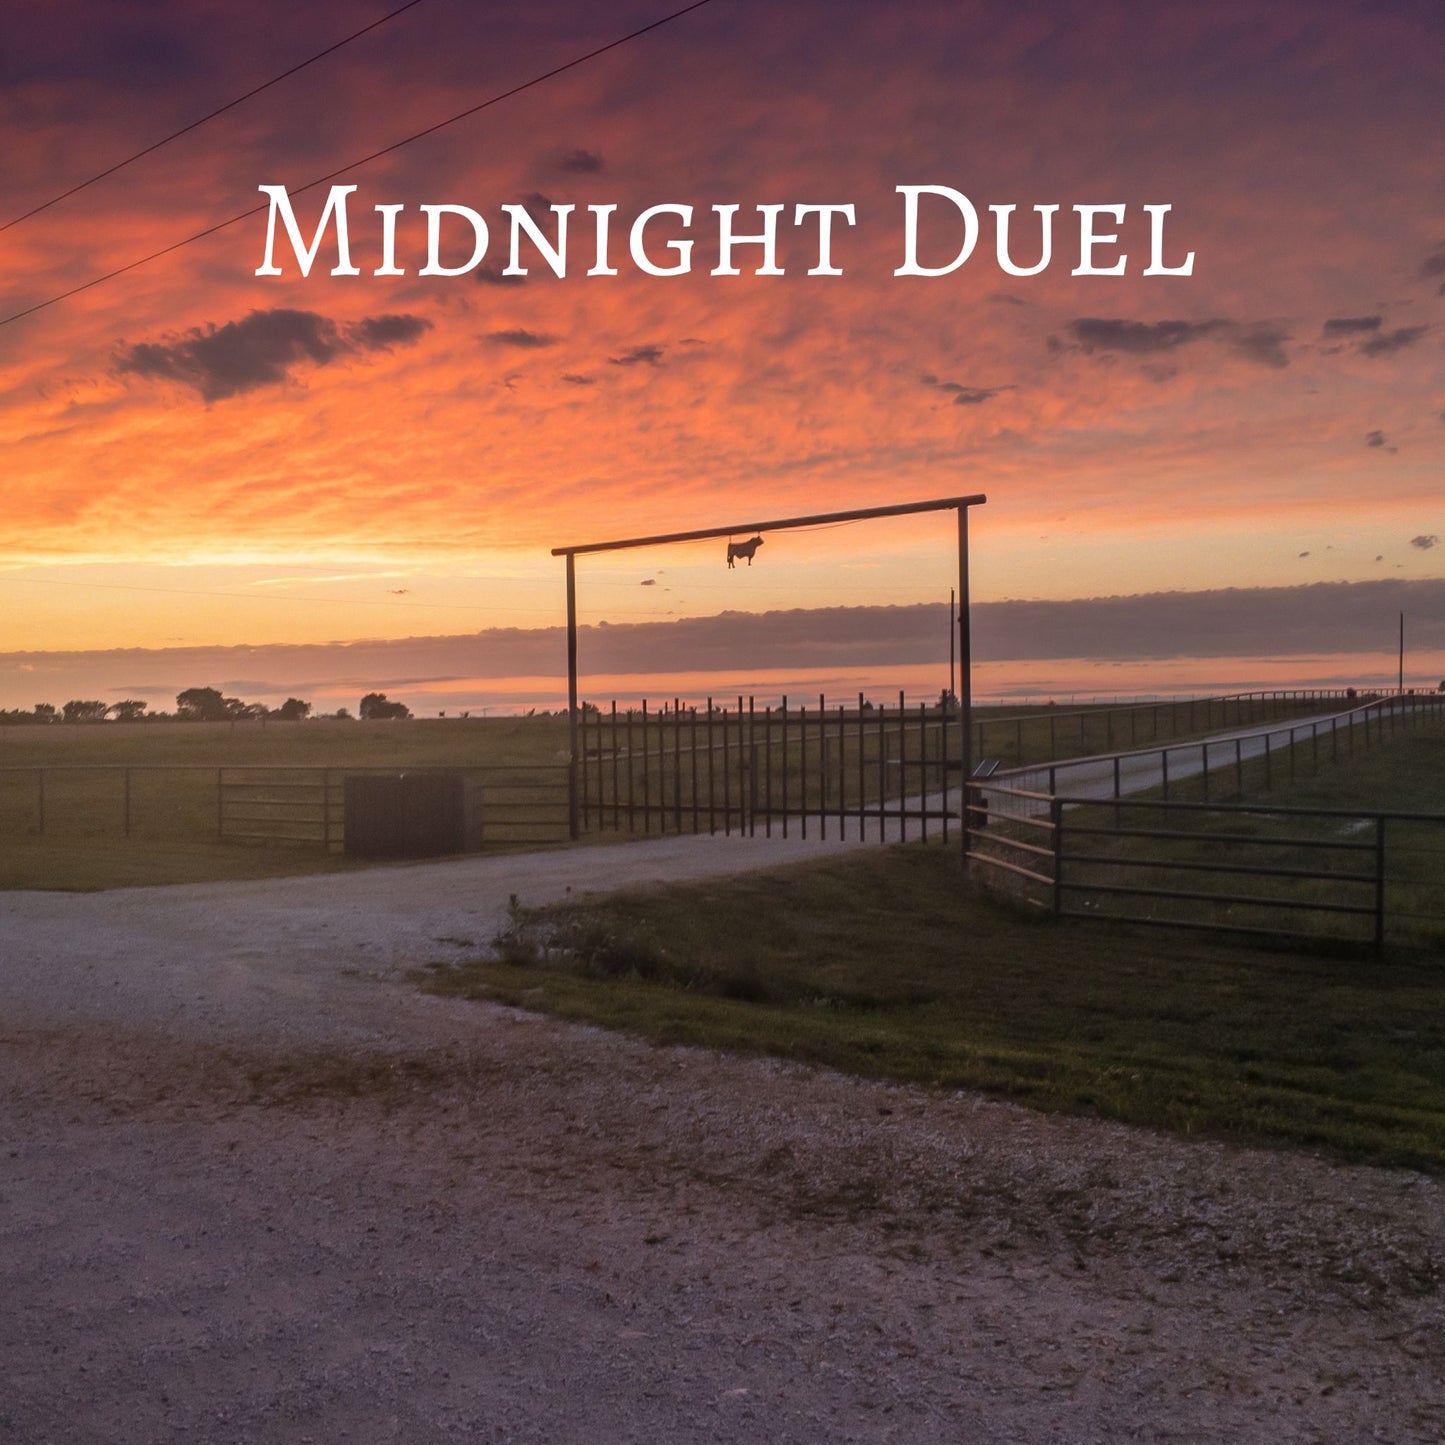 CD Cover of song Midnight Duel